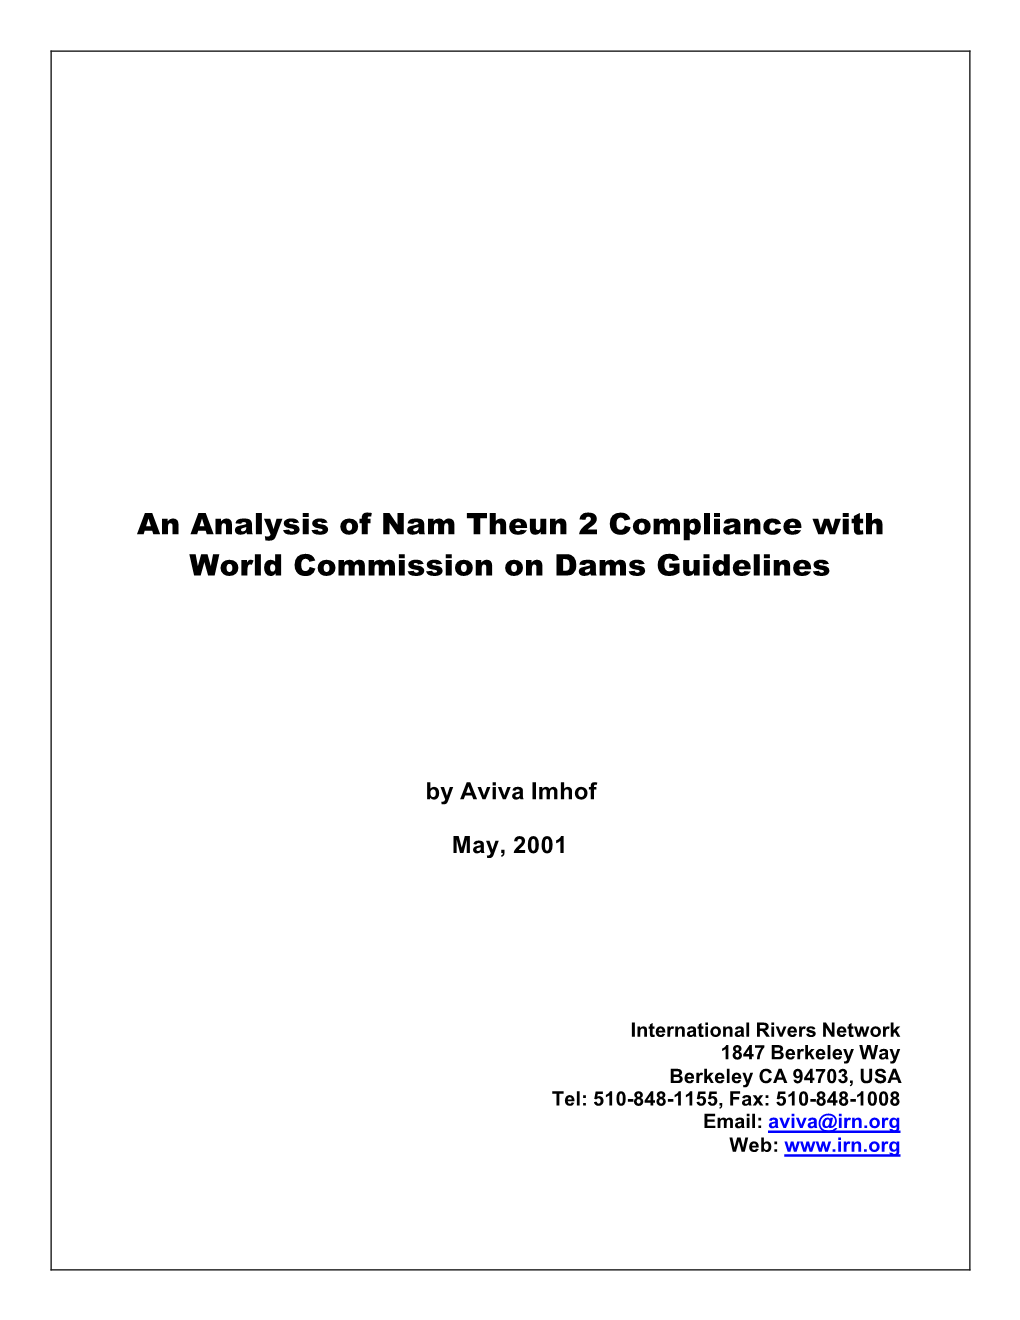 An Analysis of Nam Theun 2 Compliance with World Commission on Dams Guidelines